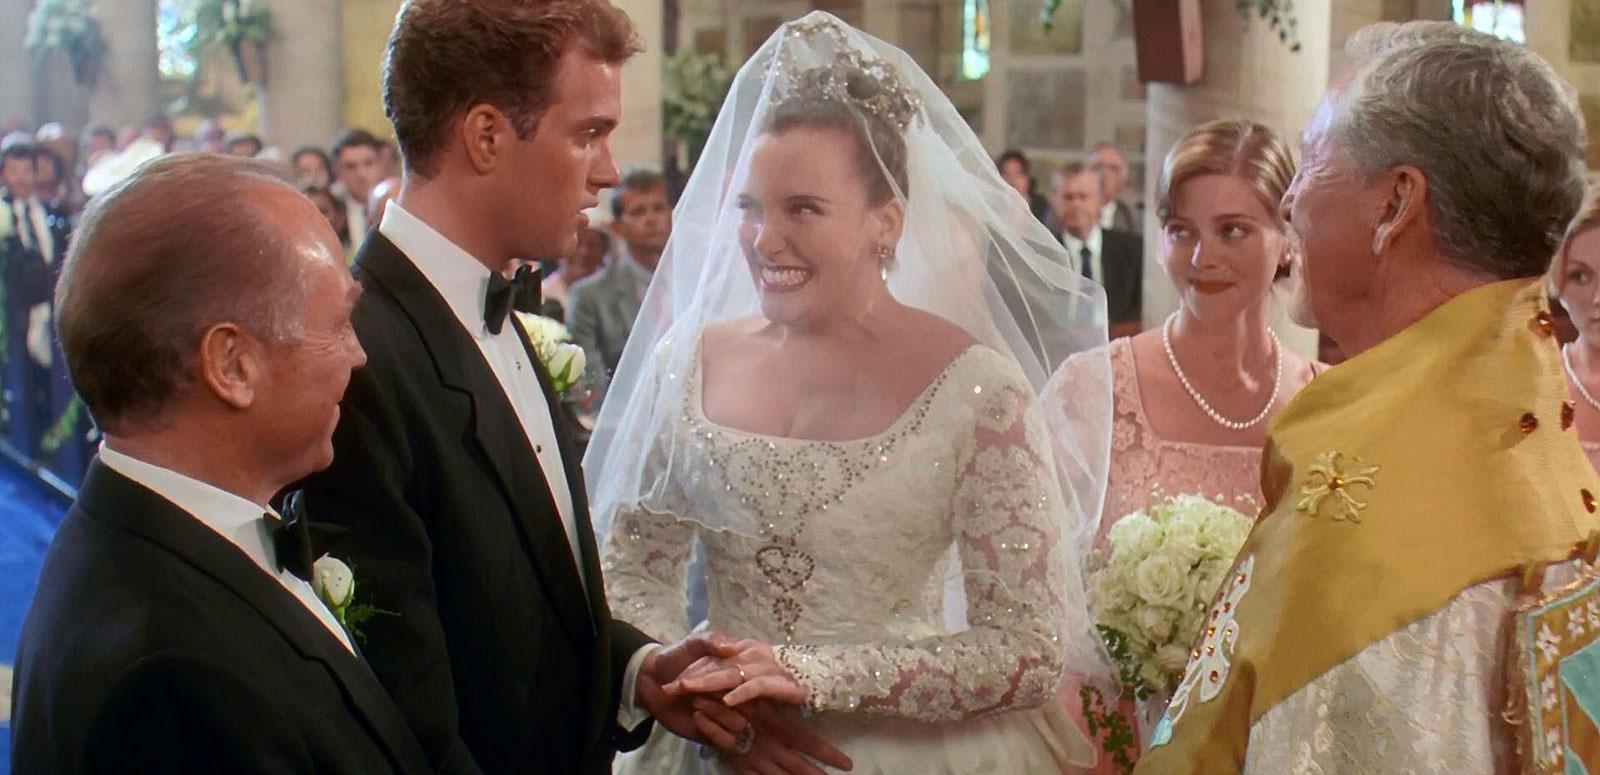 A scene from Muriel's Wedding where the main character, Muriel (Toni Collette) is getting married. She's standing at the alter with her groom, his best man, her bridesmaid and a minister.